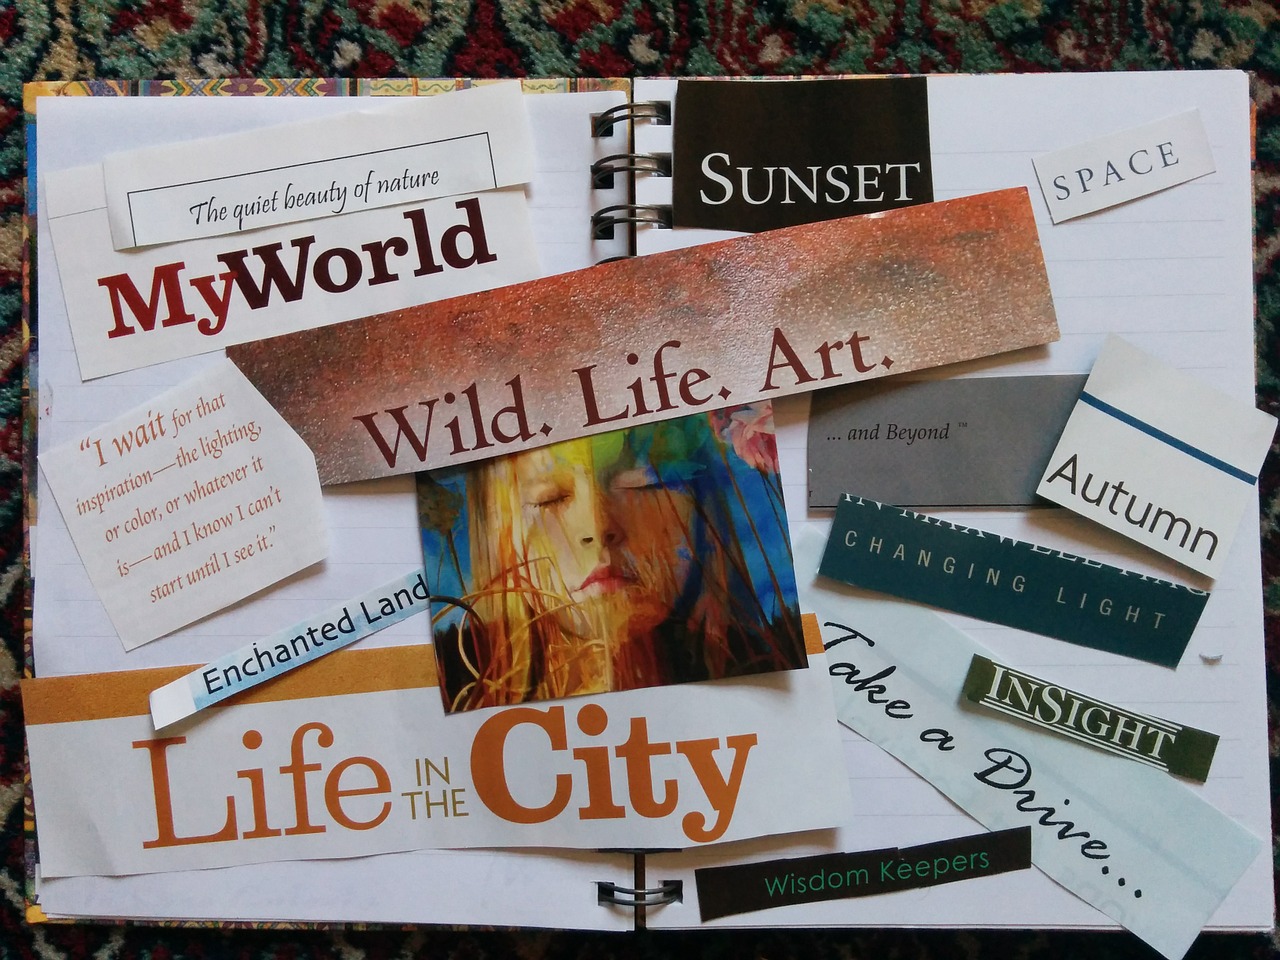 Vision Board Workshop and much more